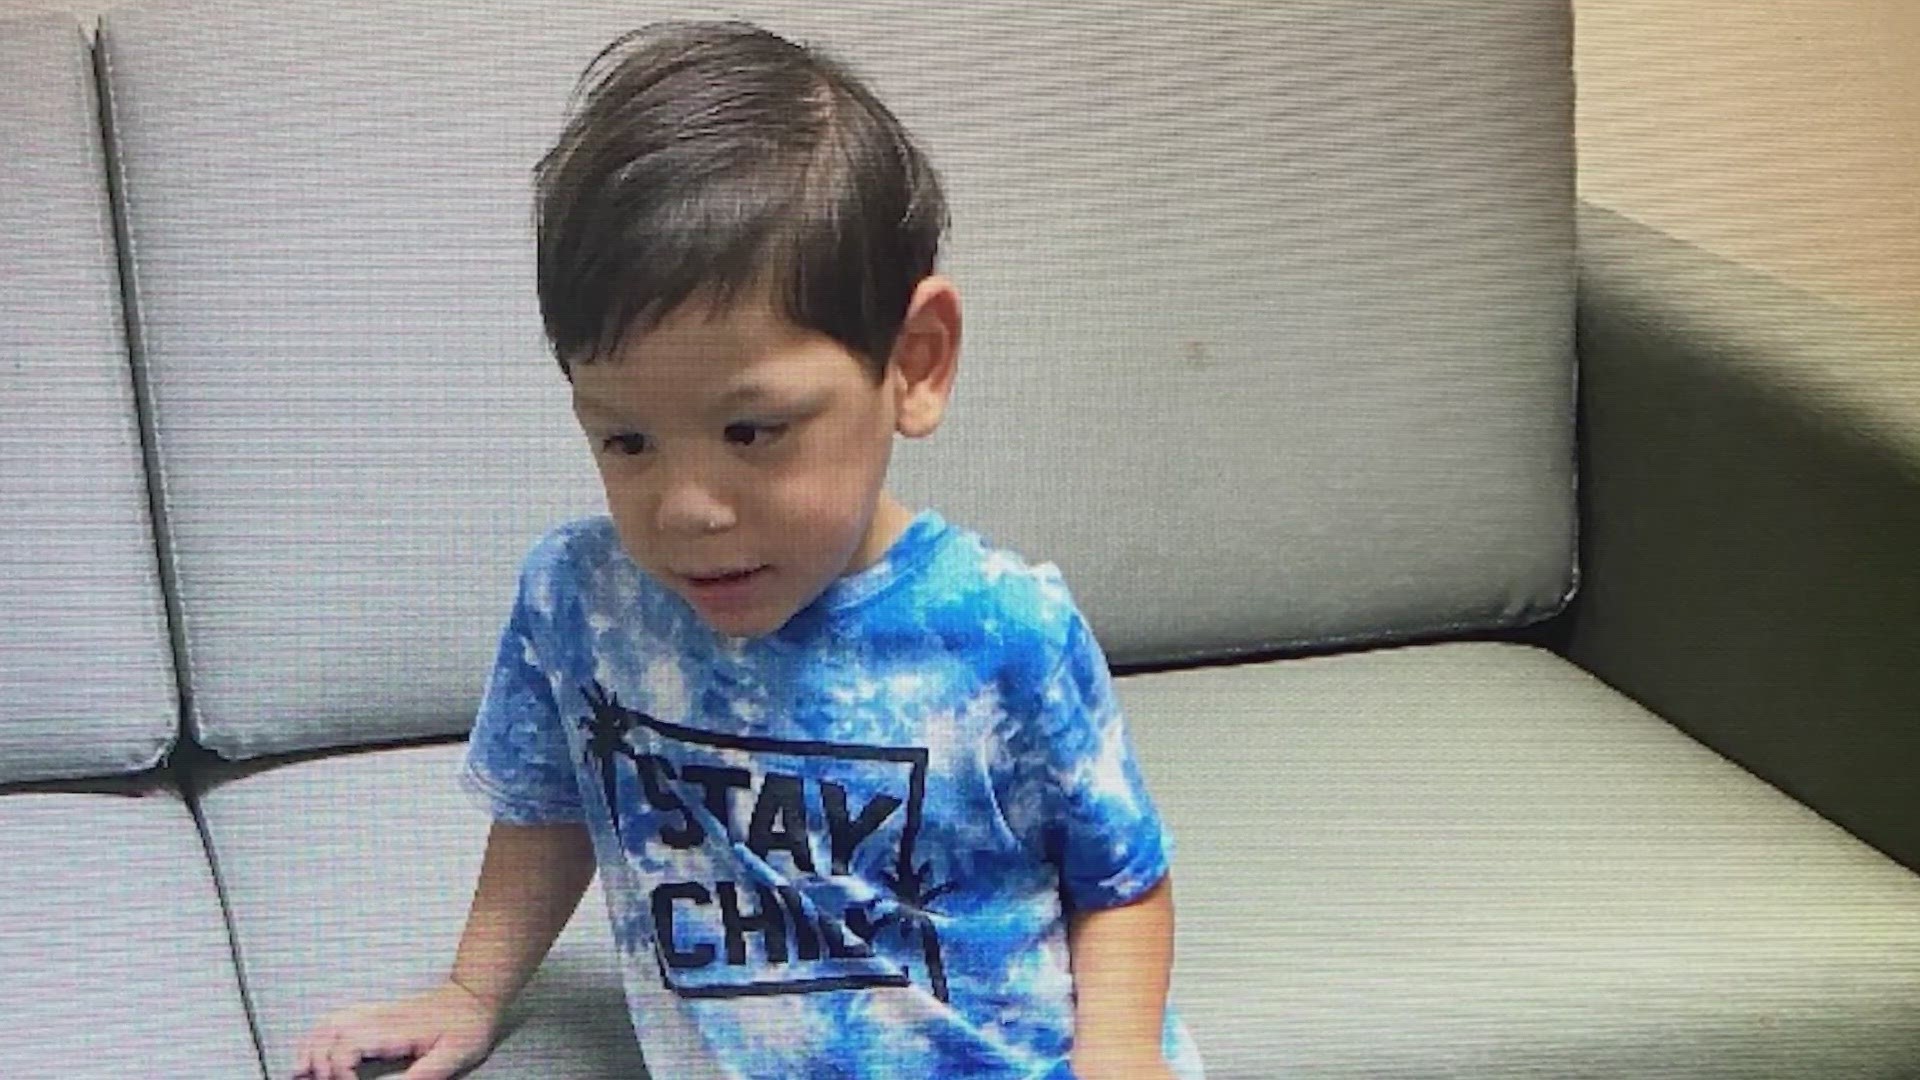 Police in Everman believe Noel Rodriguez-Alvarez, 6, is dead. His mother and stepfather, believed to be in India, are wanted in connection to his disappearance.